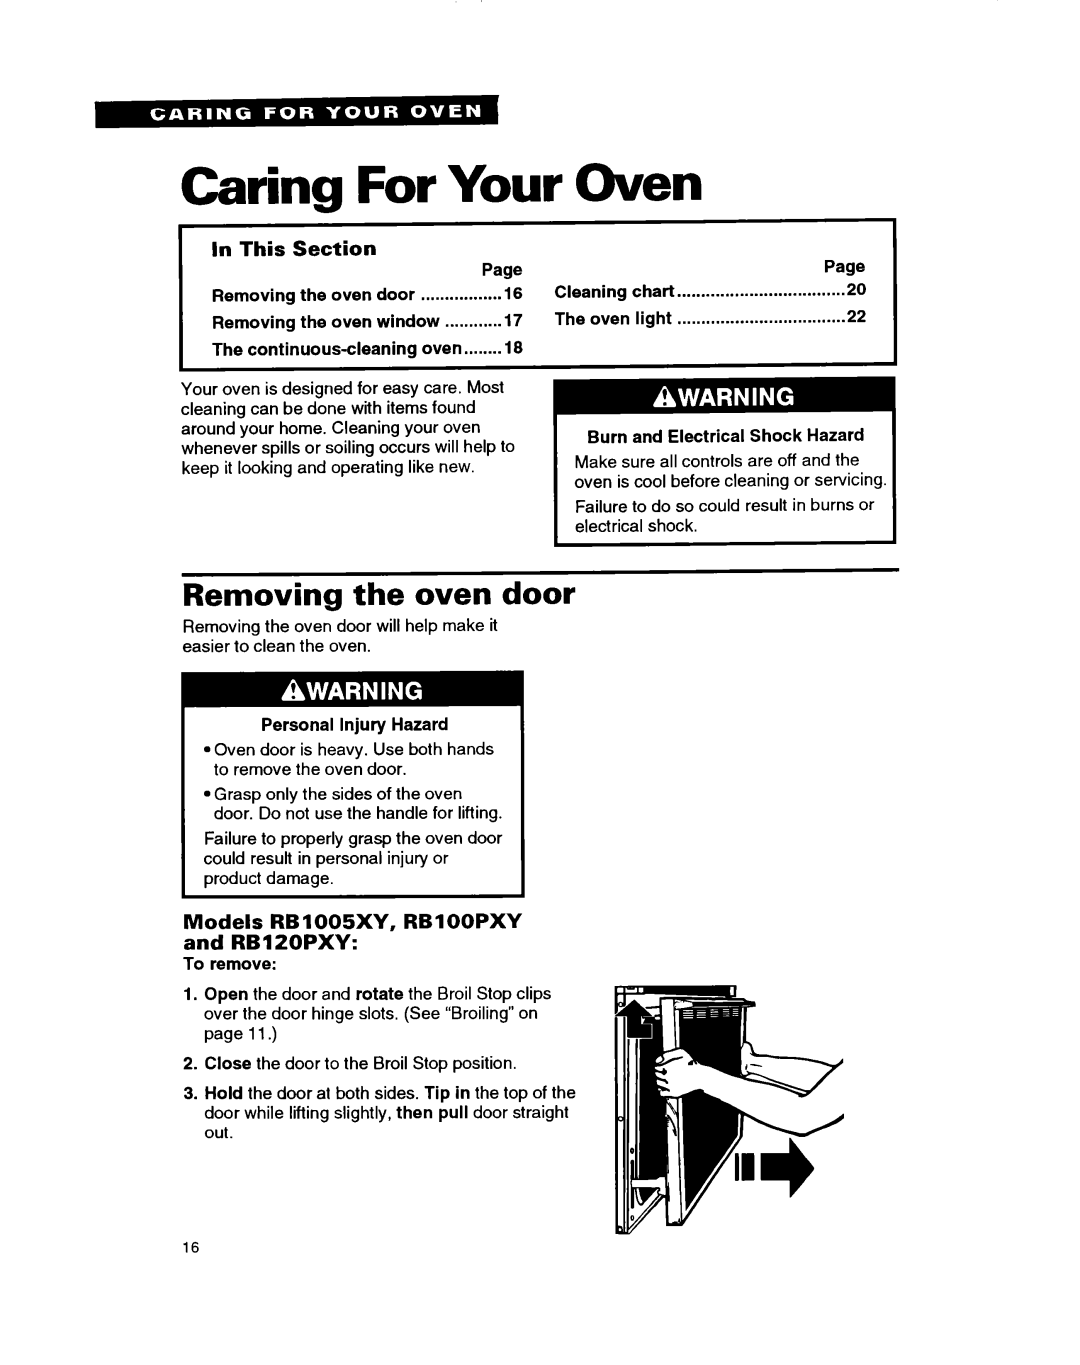 Whirlpool RB220PXB important safety instructions Caring For Your Oven, Removing the oven door 